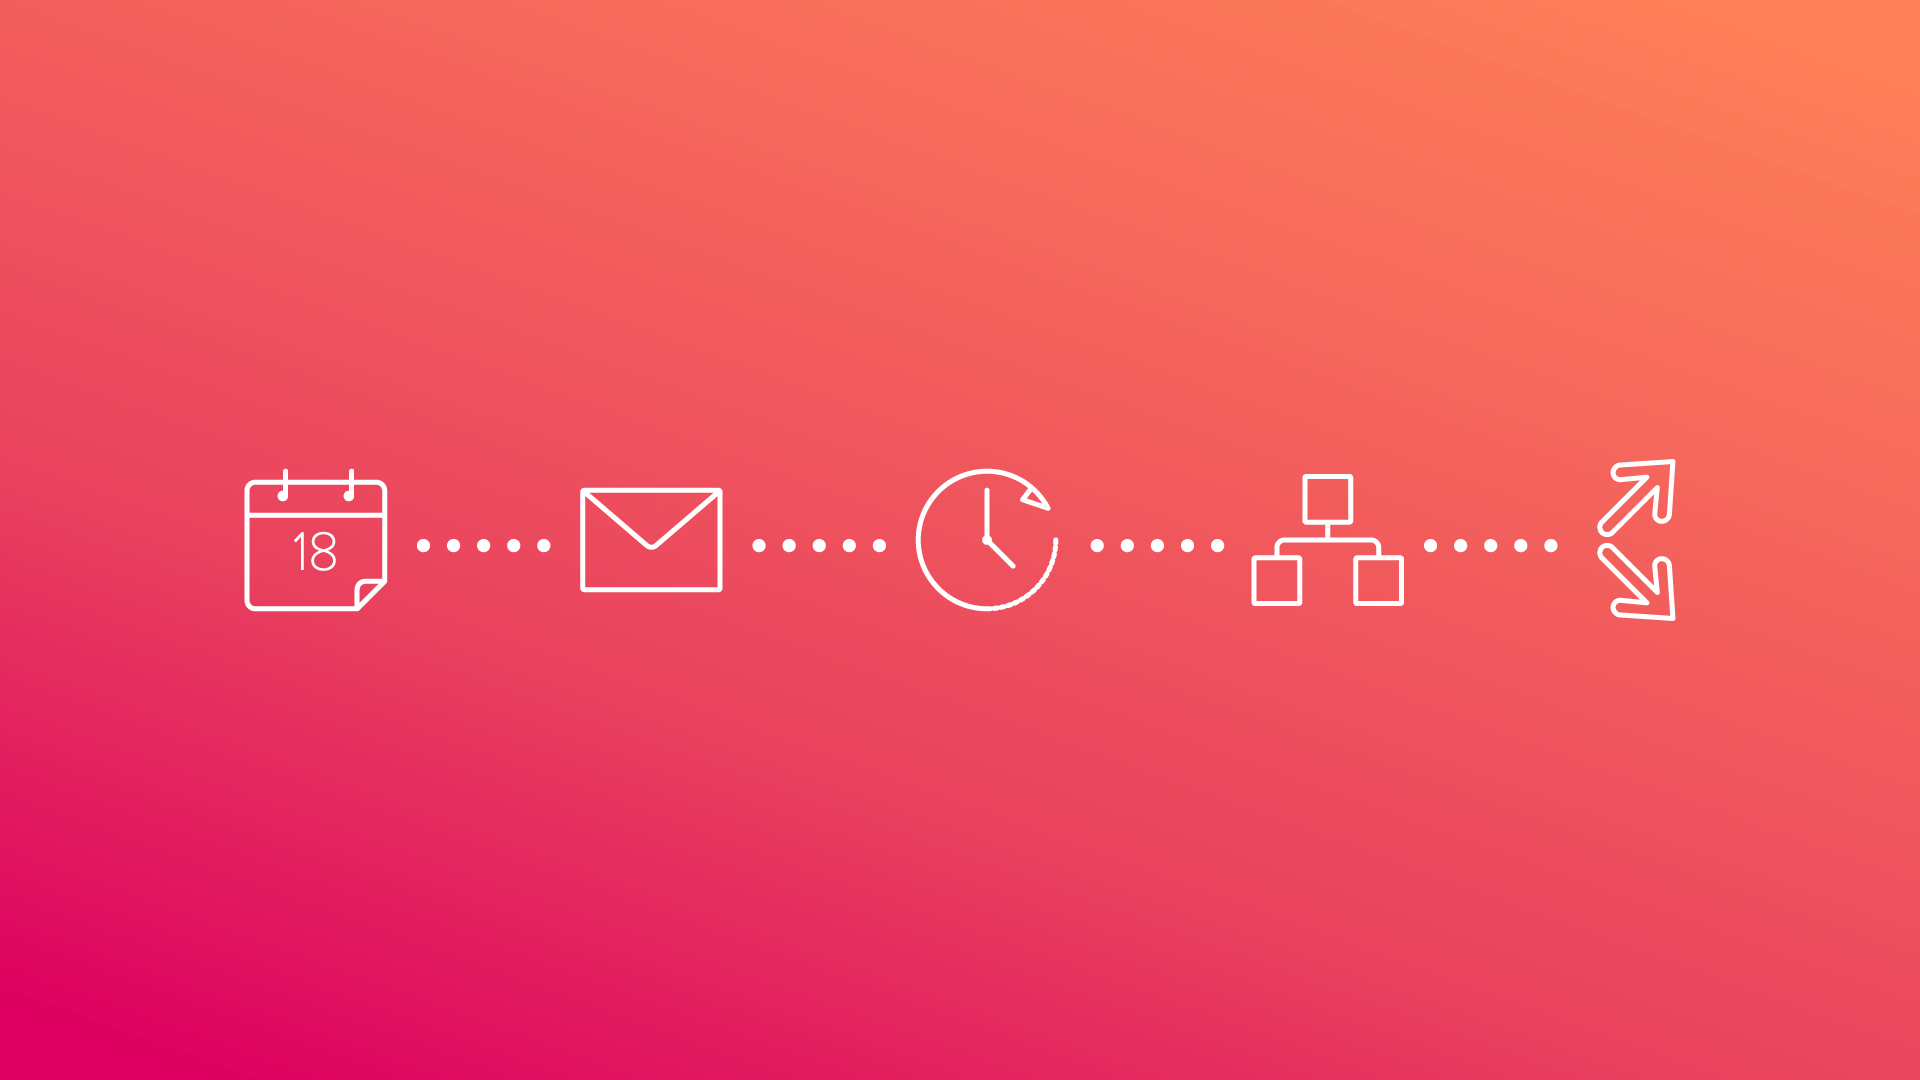 Icons in a horizontal row representing steps of marketing automation workflow: calendar, email, clock, logic flow, and diverging arrows.